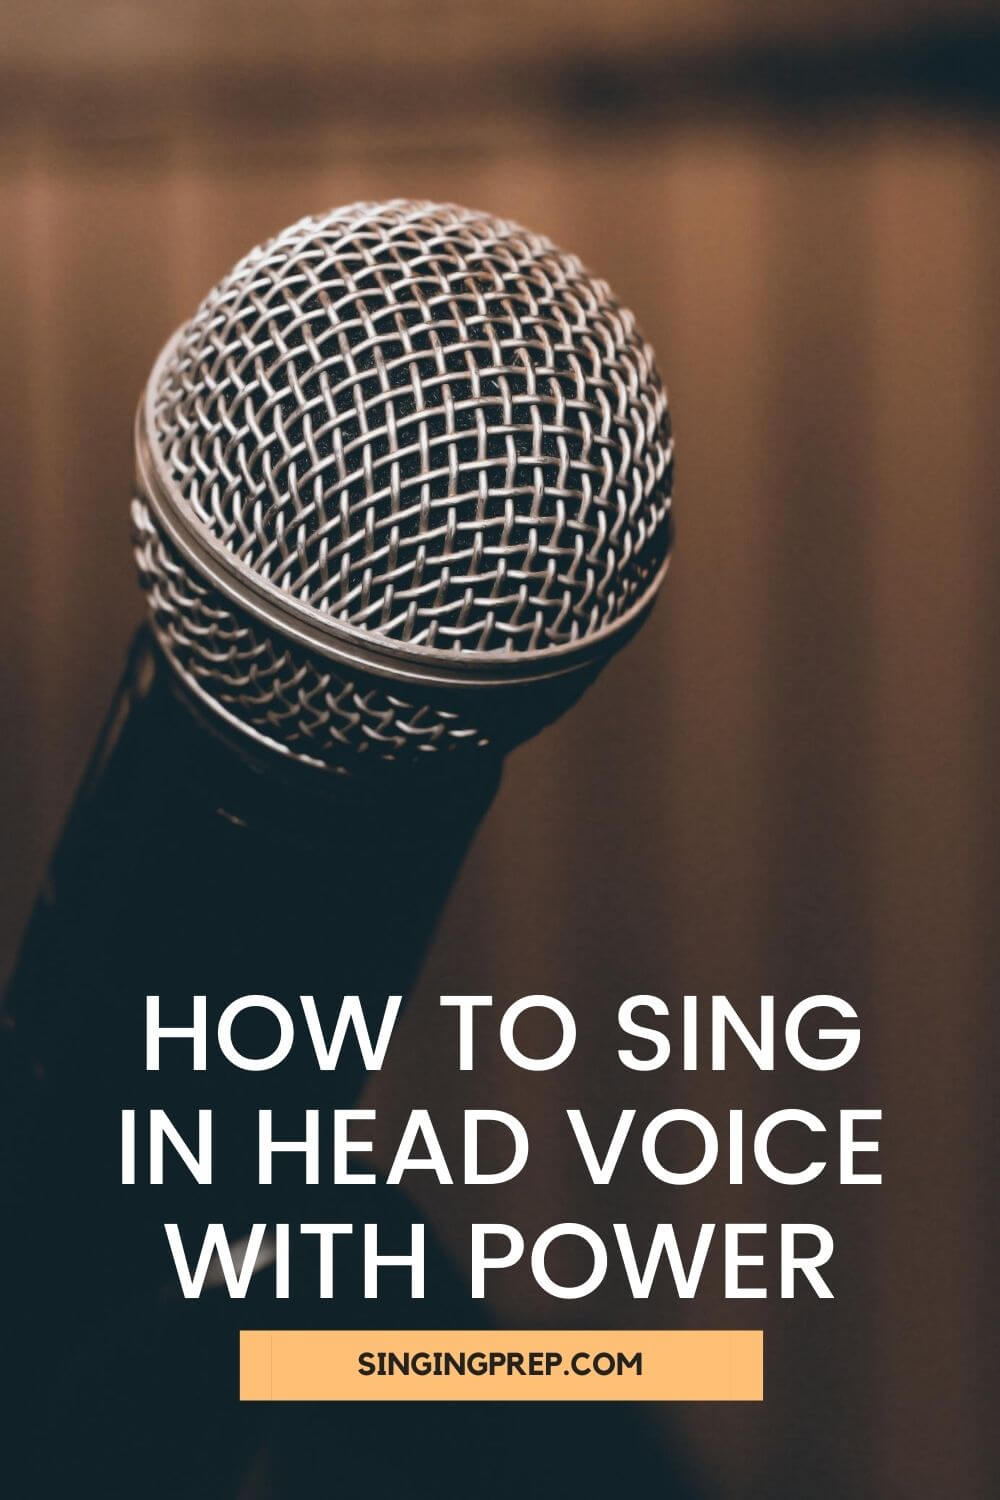 How to sing in head voice with power pin